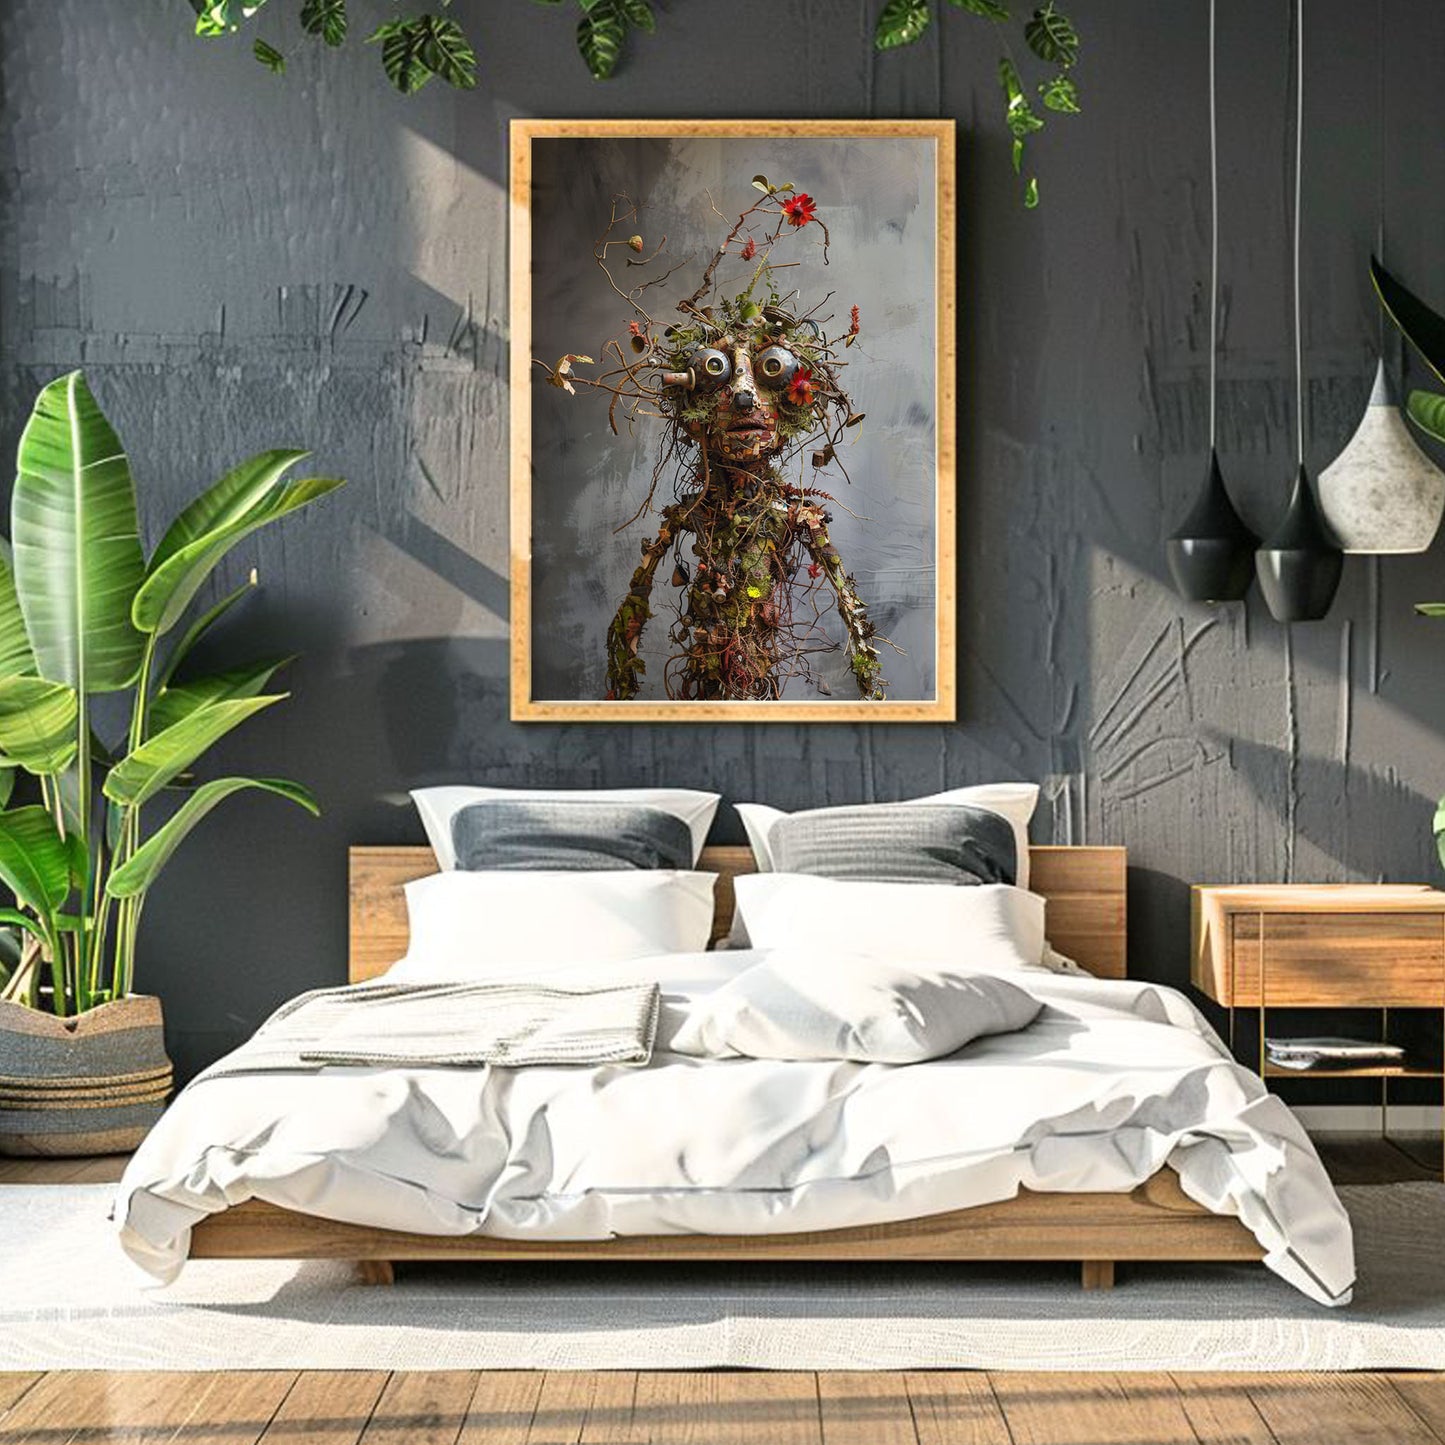 Funky Bio Robot Poster - Quirky Wall Art with Chameleon Twist